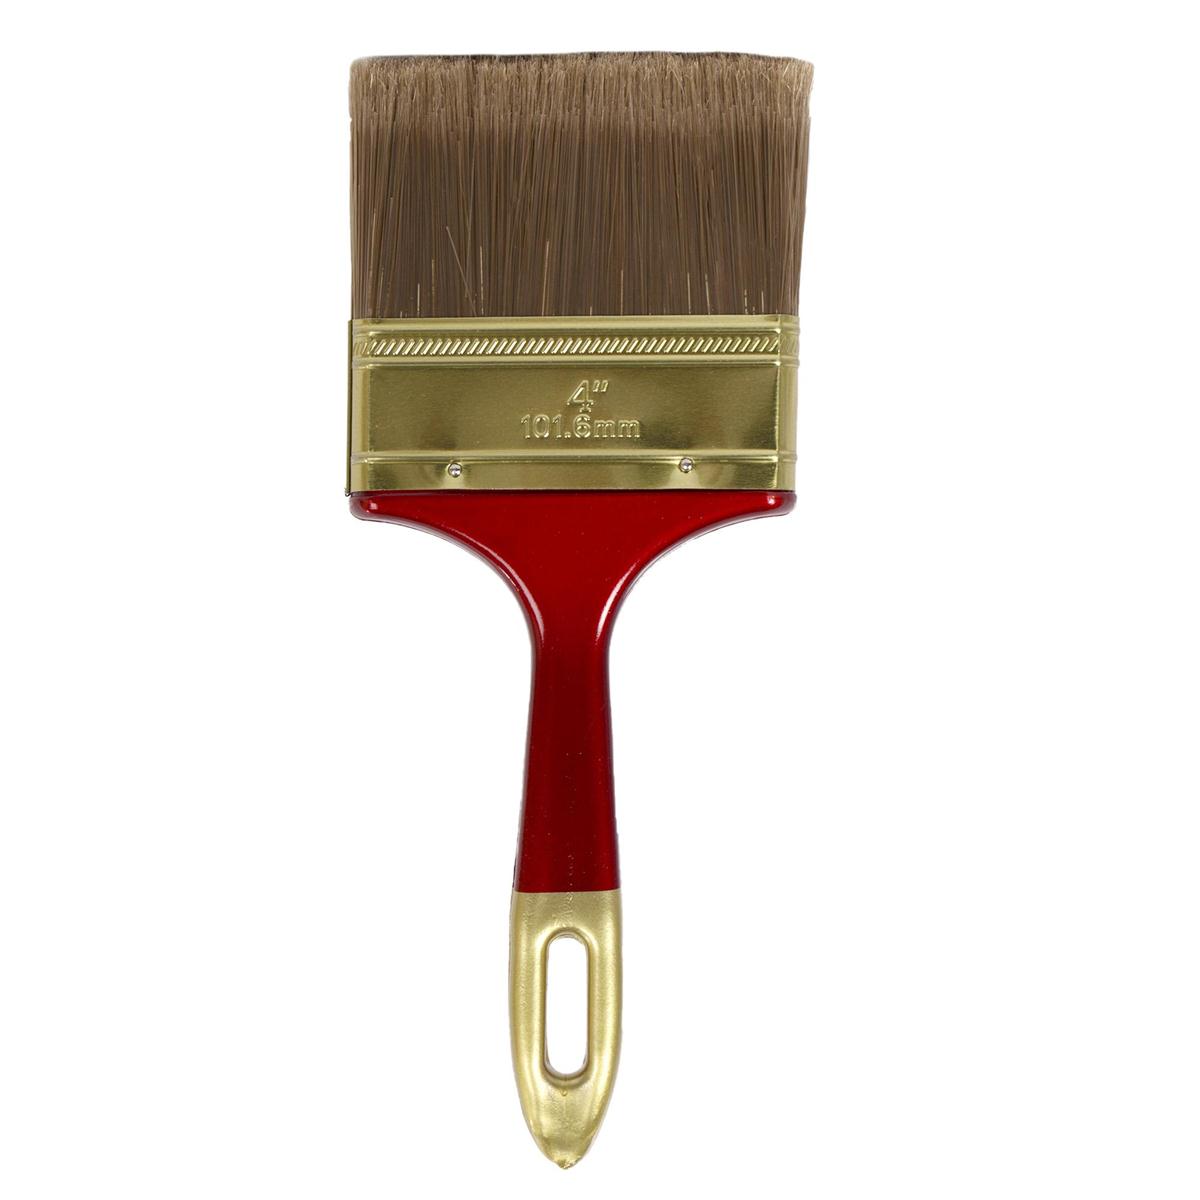 H.E. Paint Pro 4-Inch Paintbrush with Vinyl Bag and Label